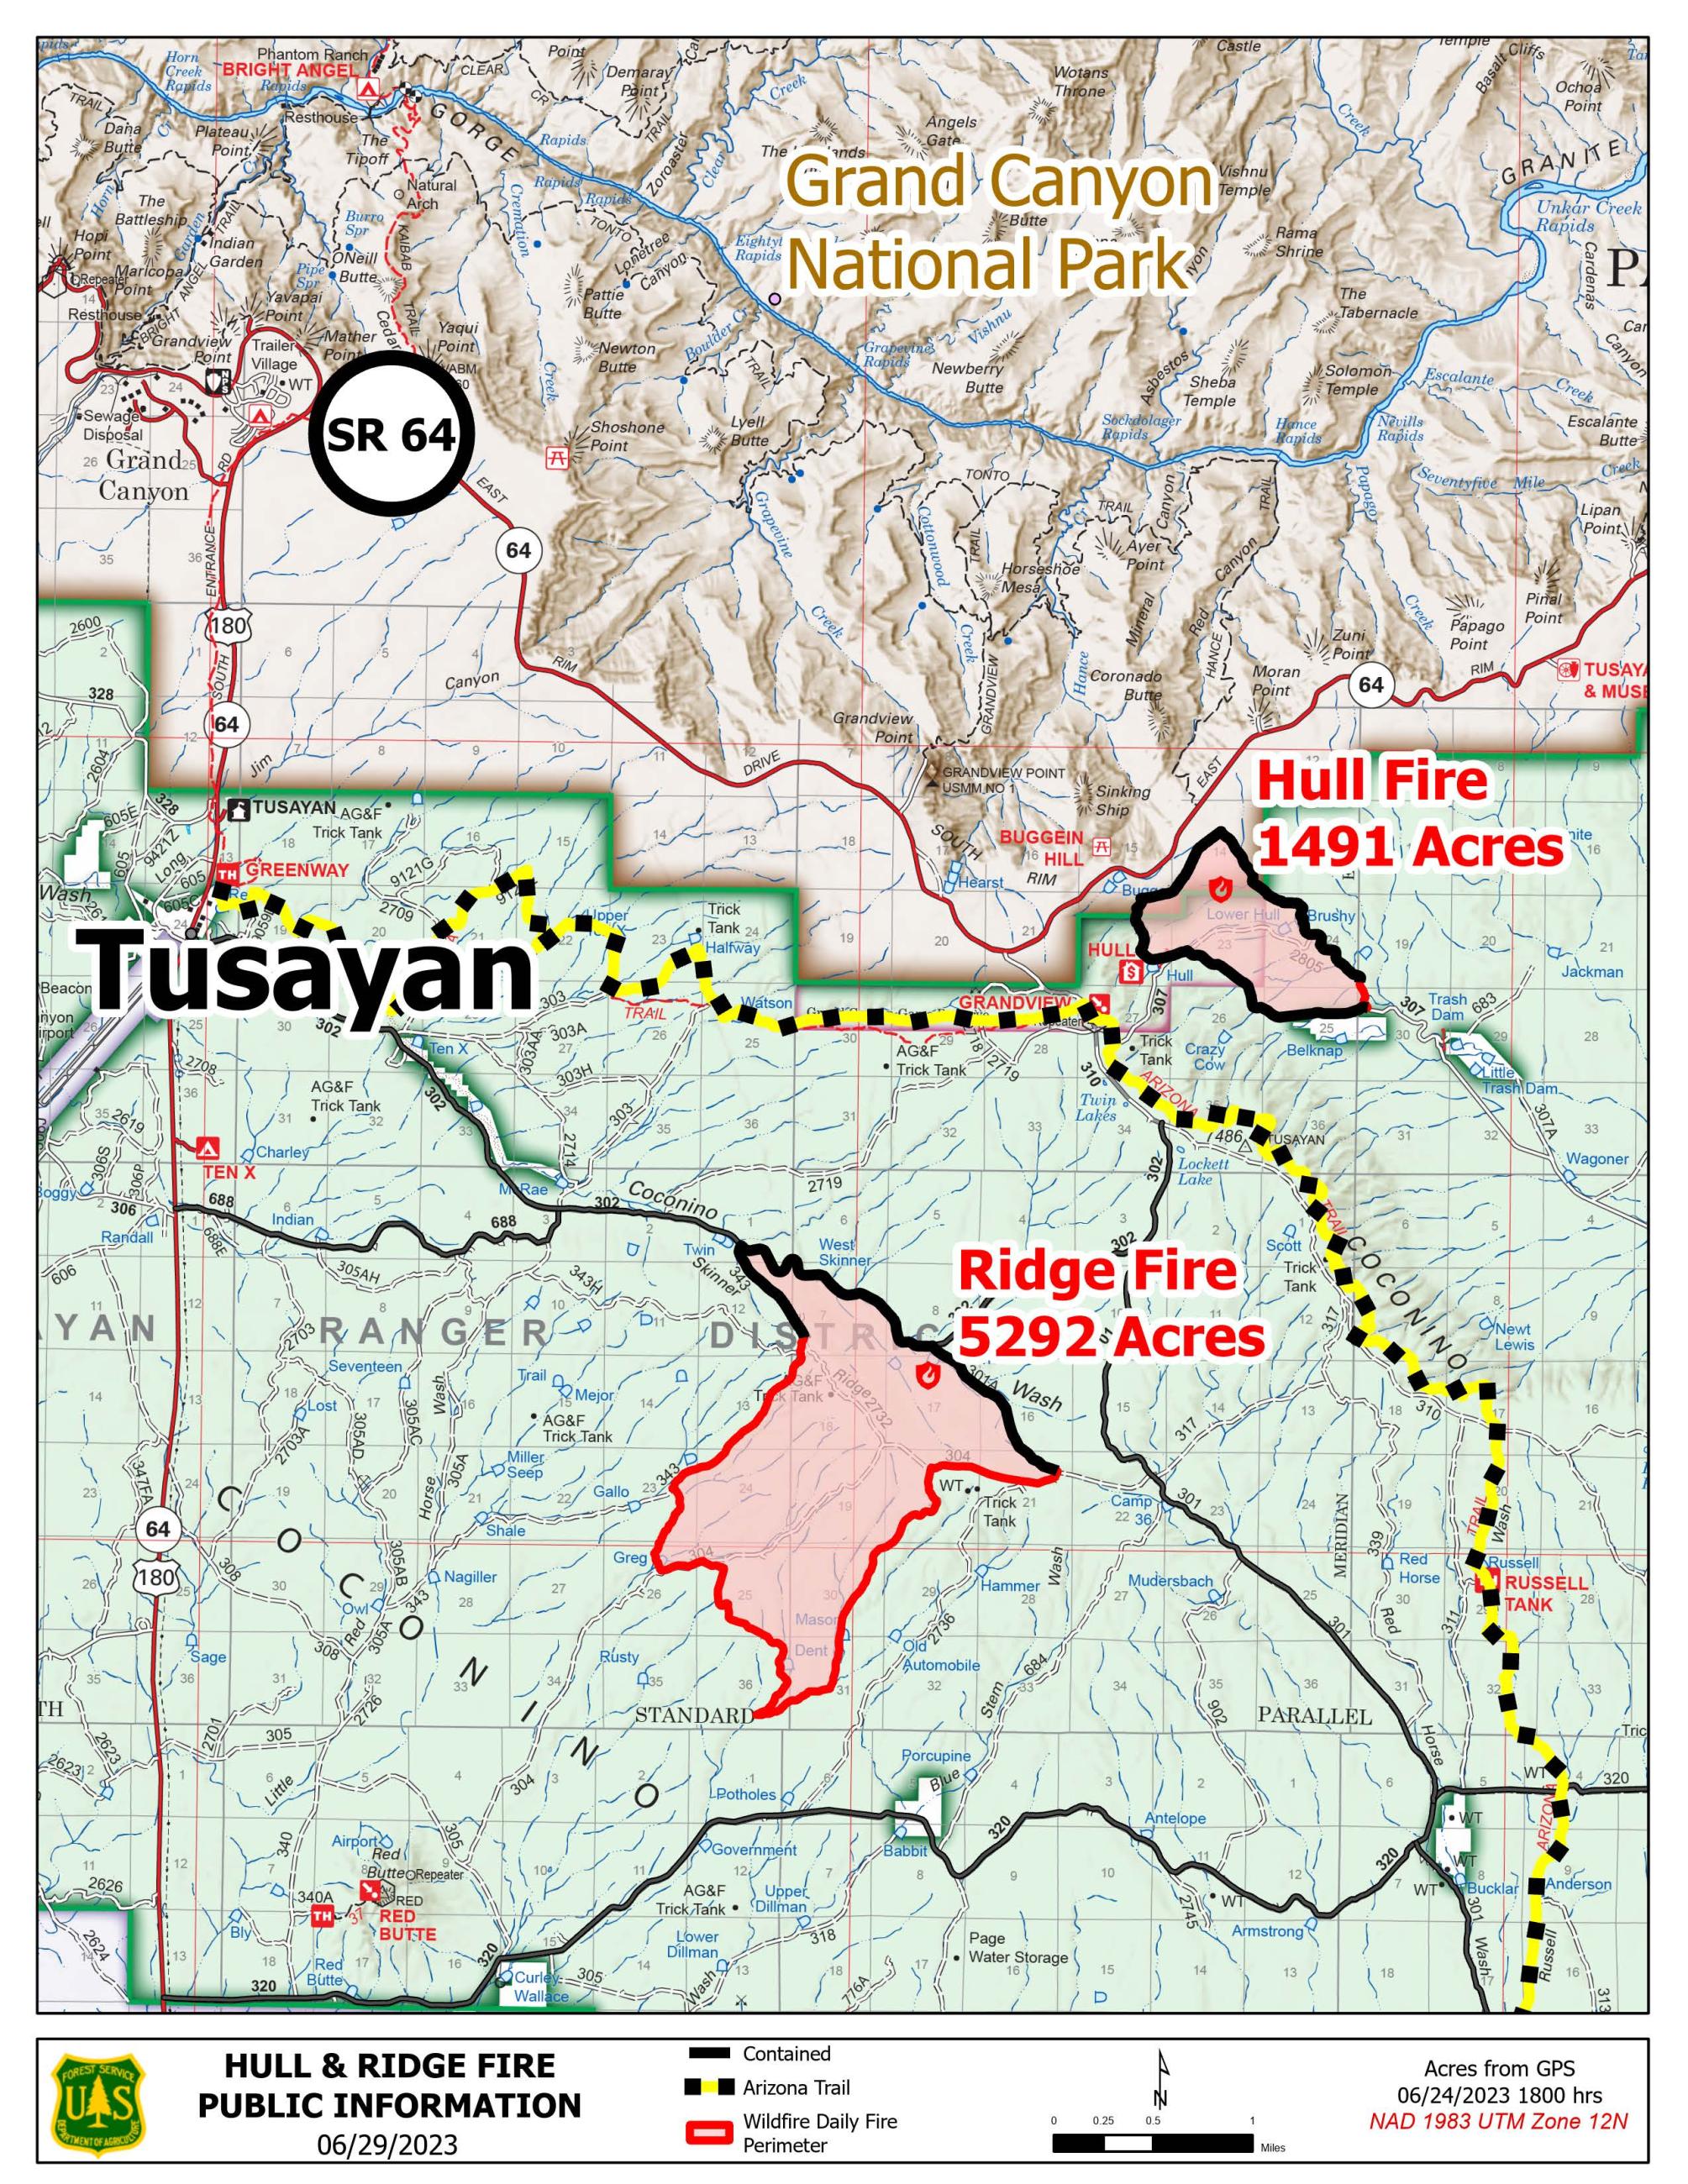 Map of the Ridge Fire and Hull Fire area for 7/10.